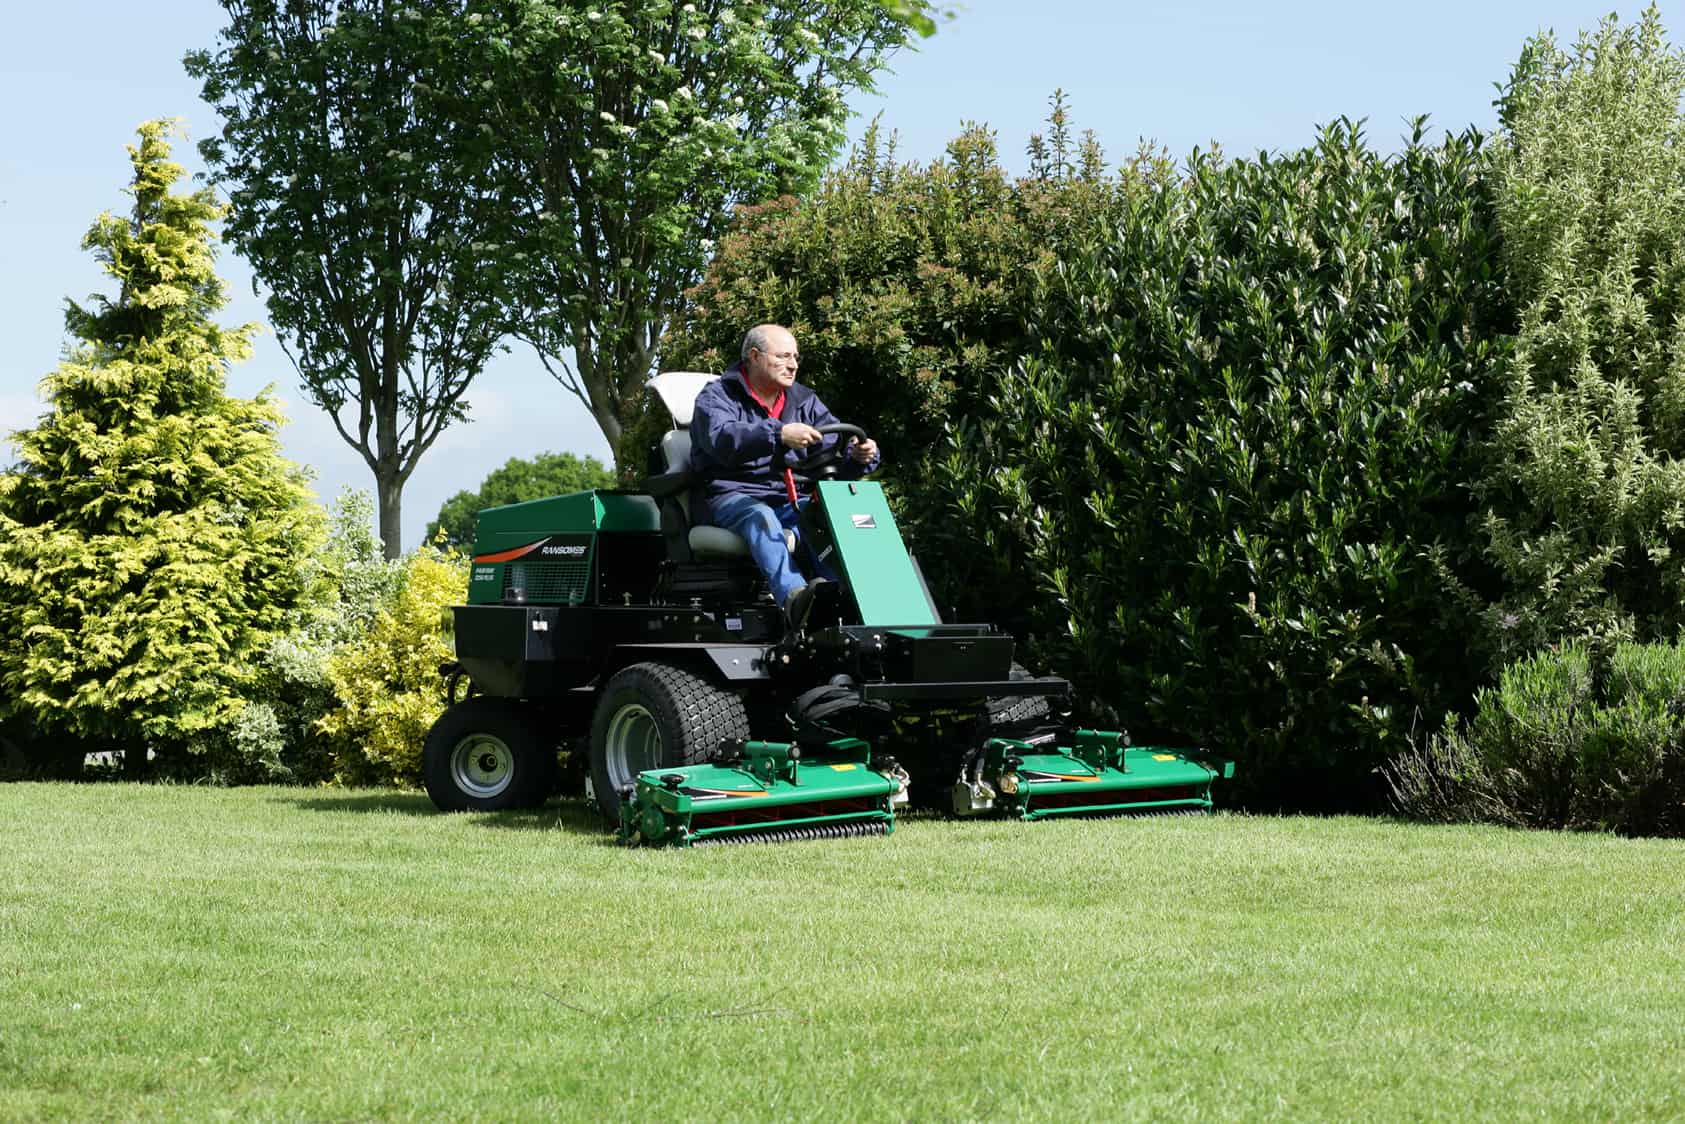 Tender opportunity: NEPO214 purchase and hire of grounds maintenance, plant and handheld tools